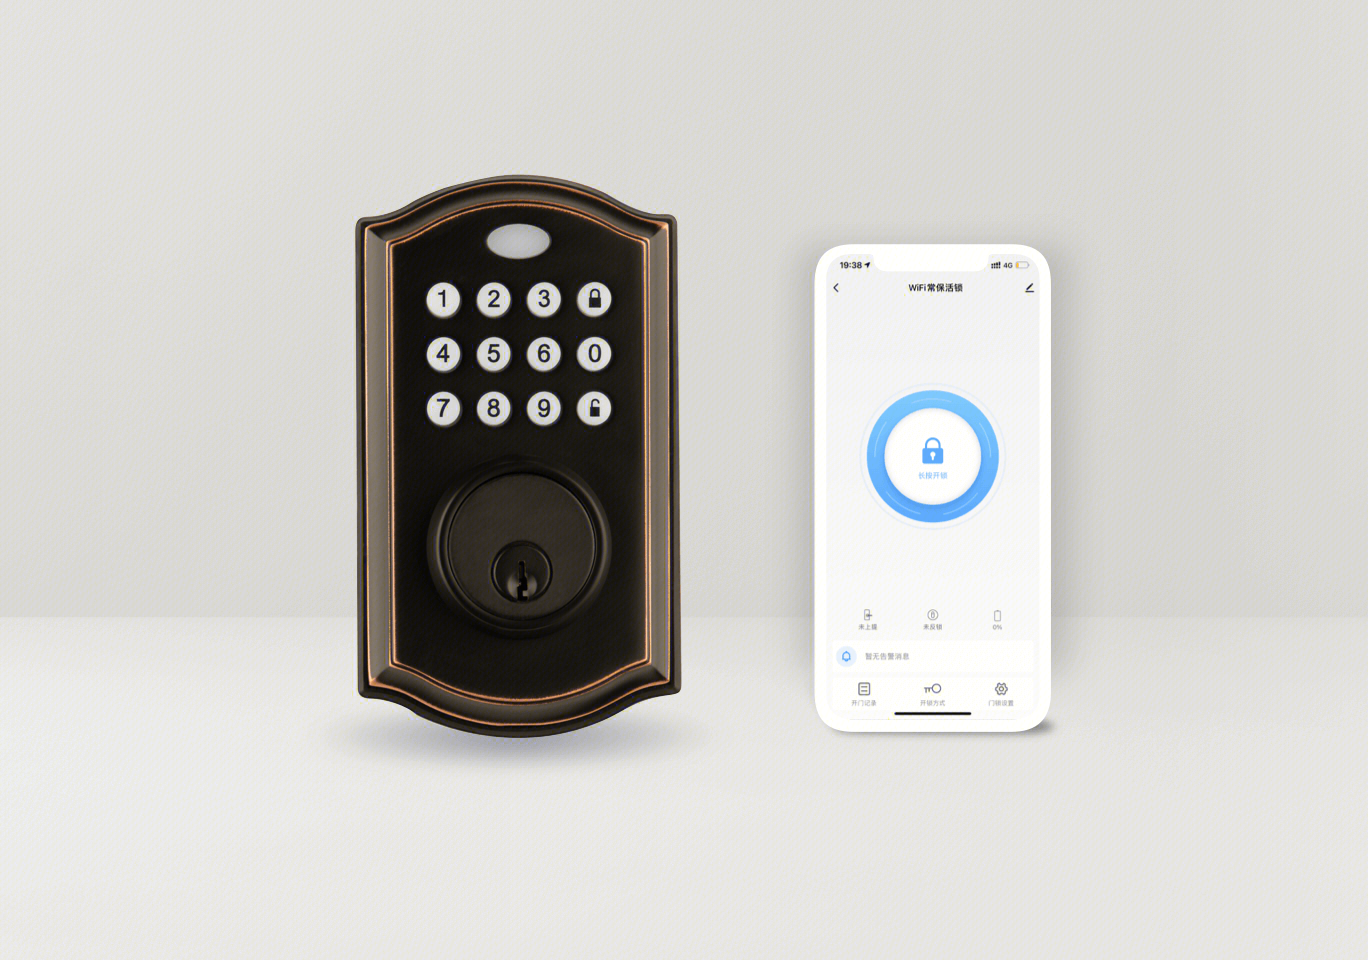 OS118TYF-How to install tuya smart lock and connect to wifi 